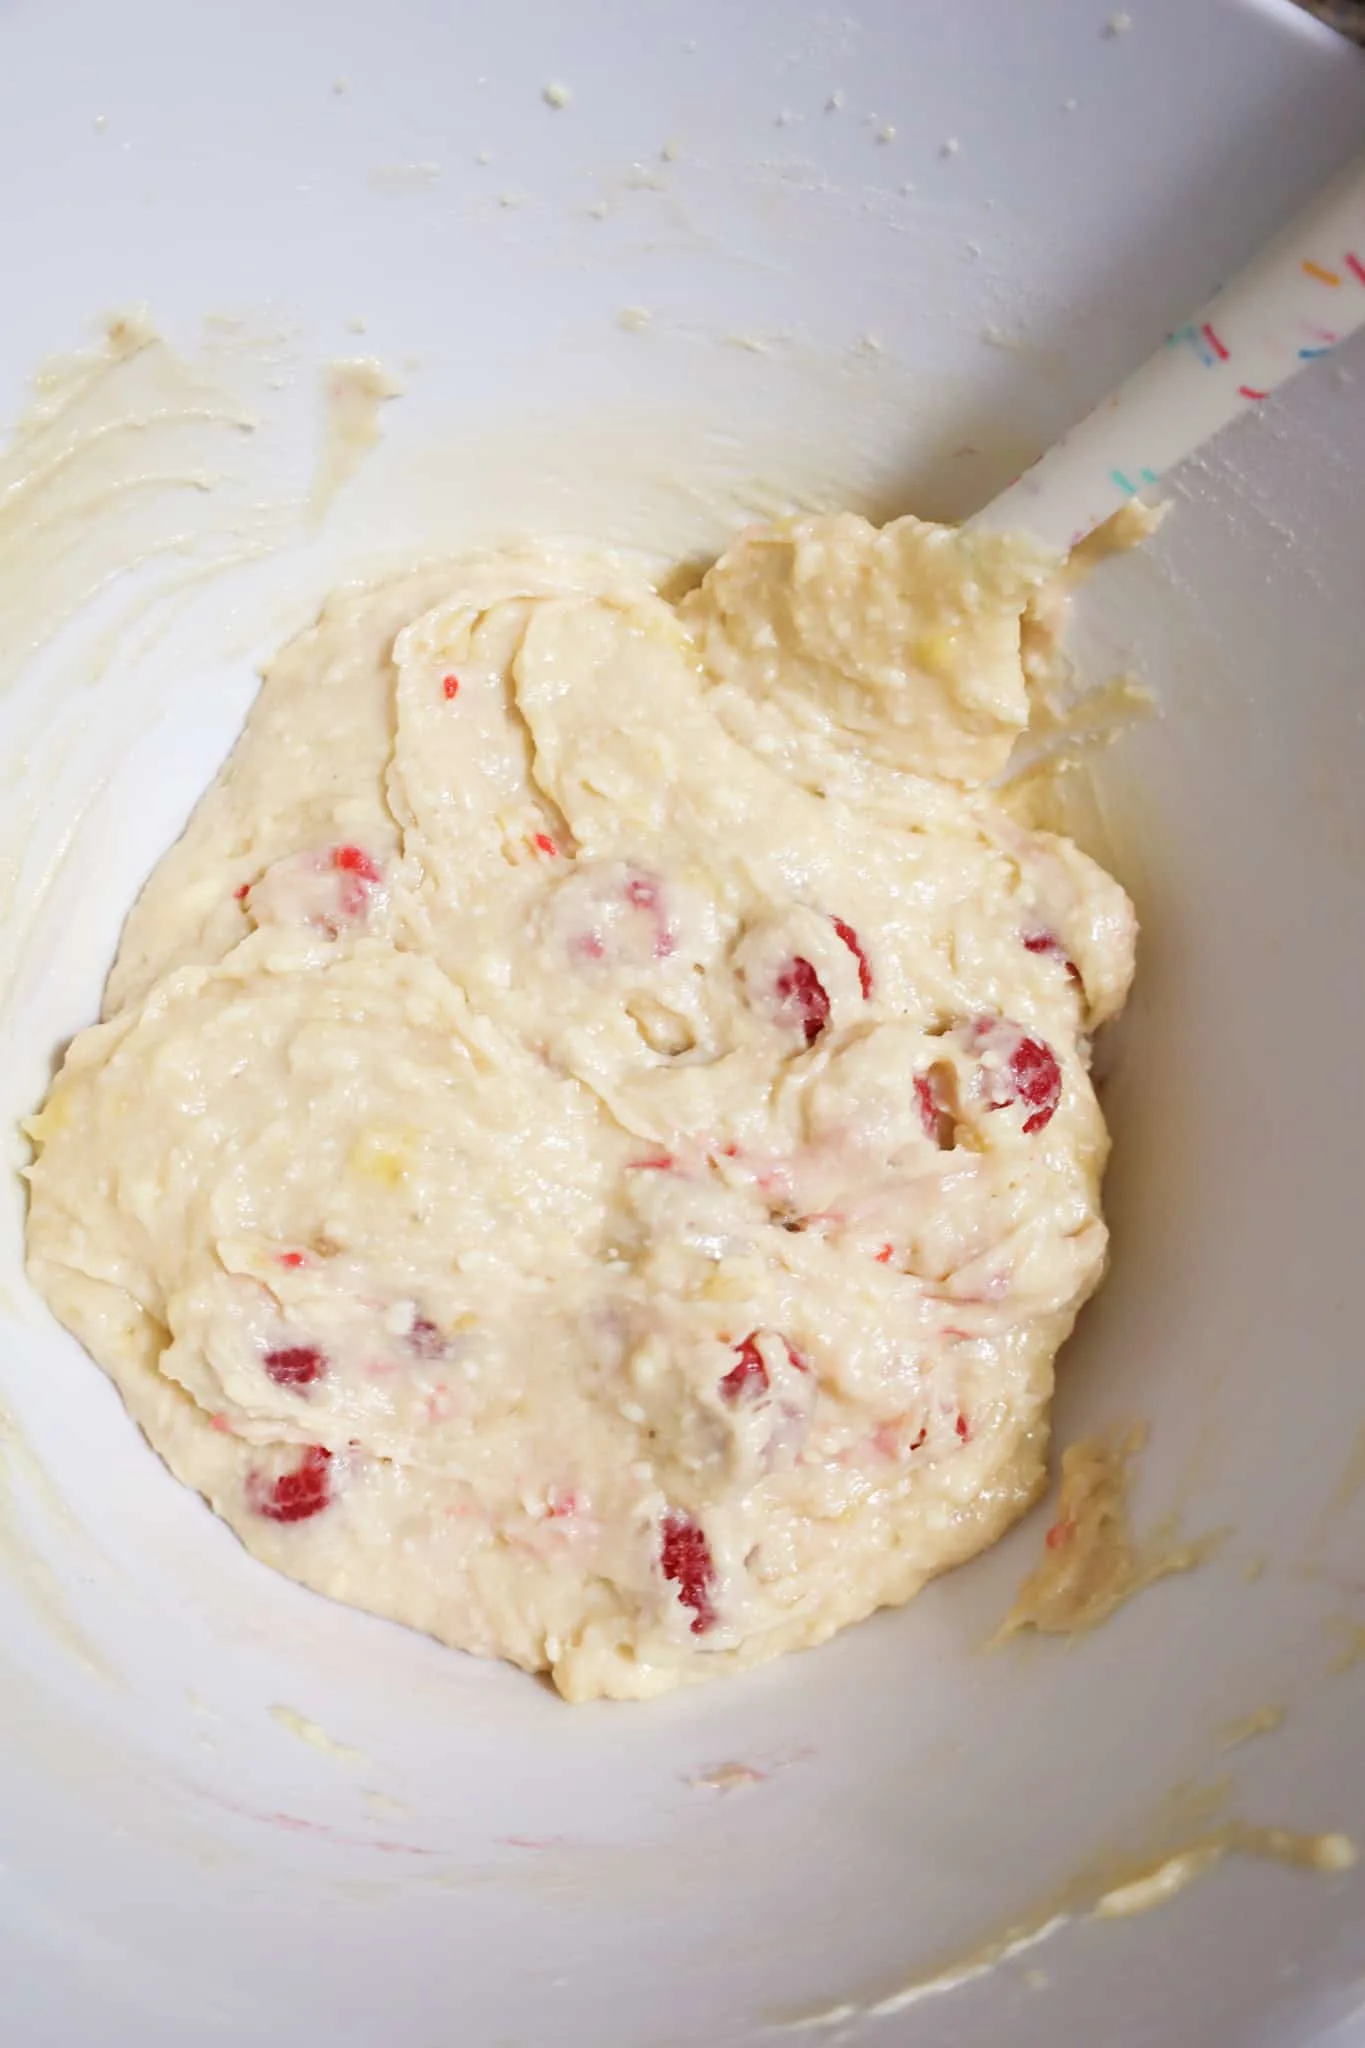 raspberries stirred into banana bread batter in a mixing bowl